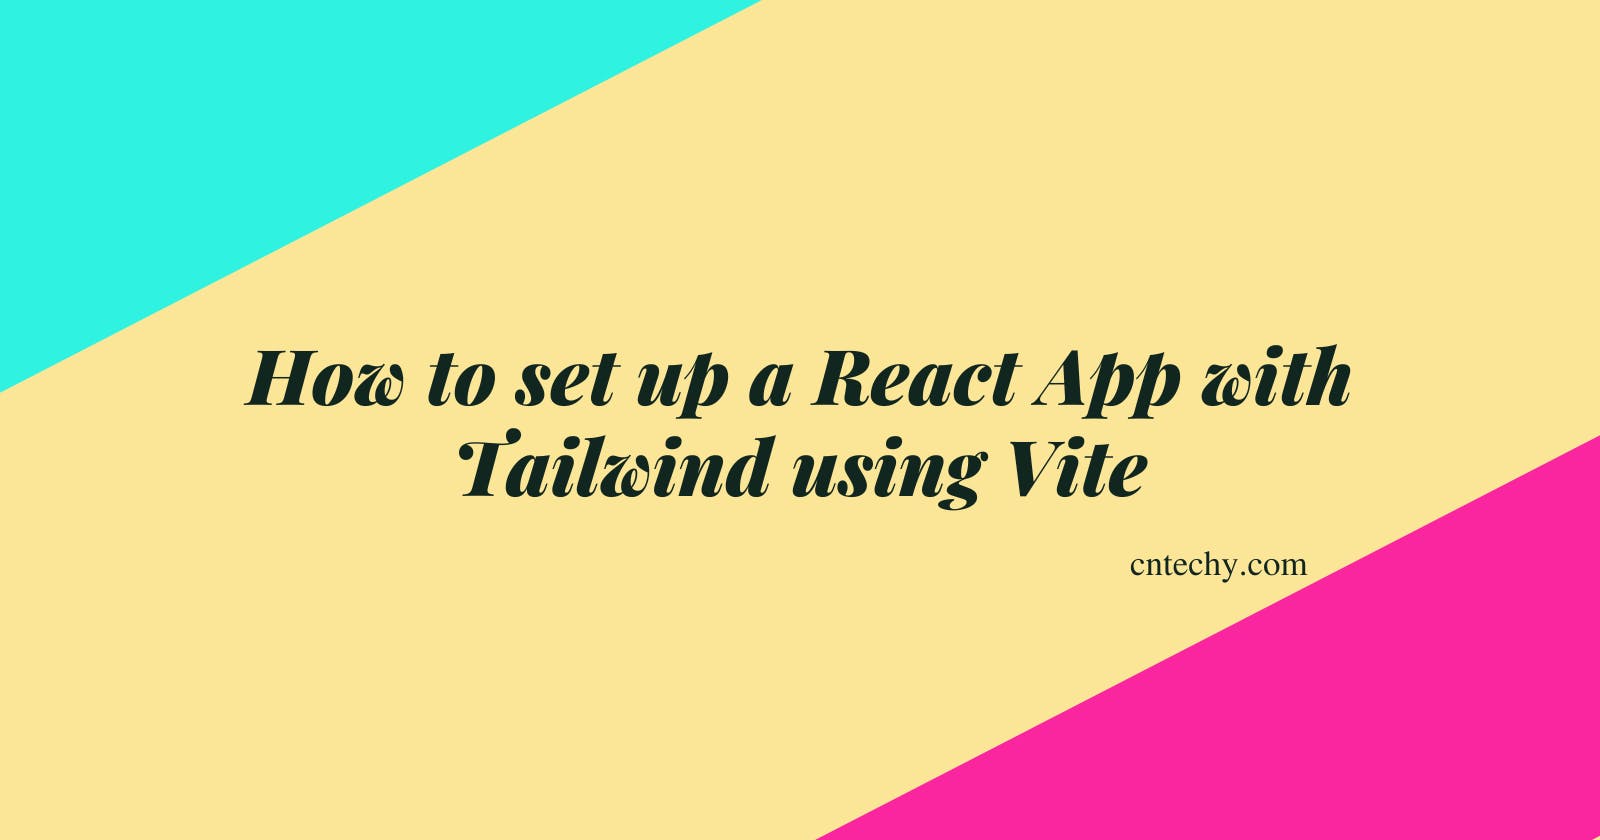 How to set up a React App with Tailwind using Vite